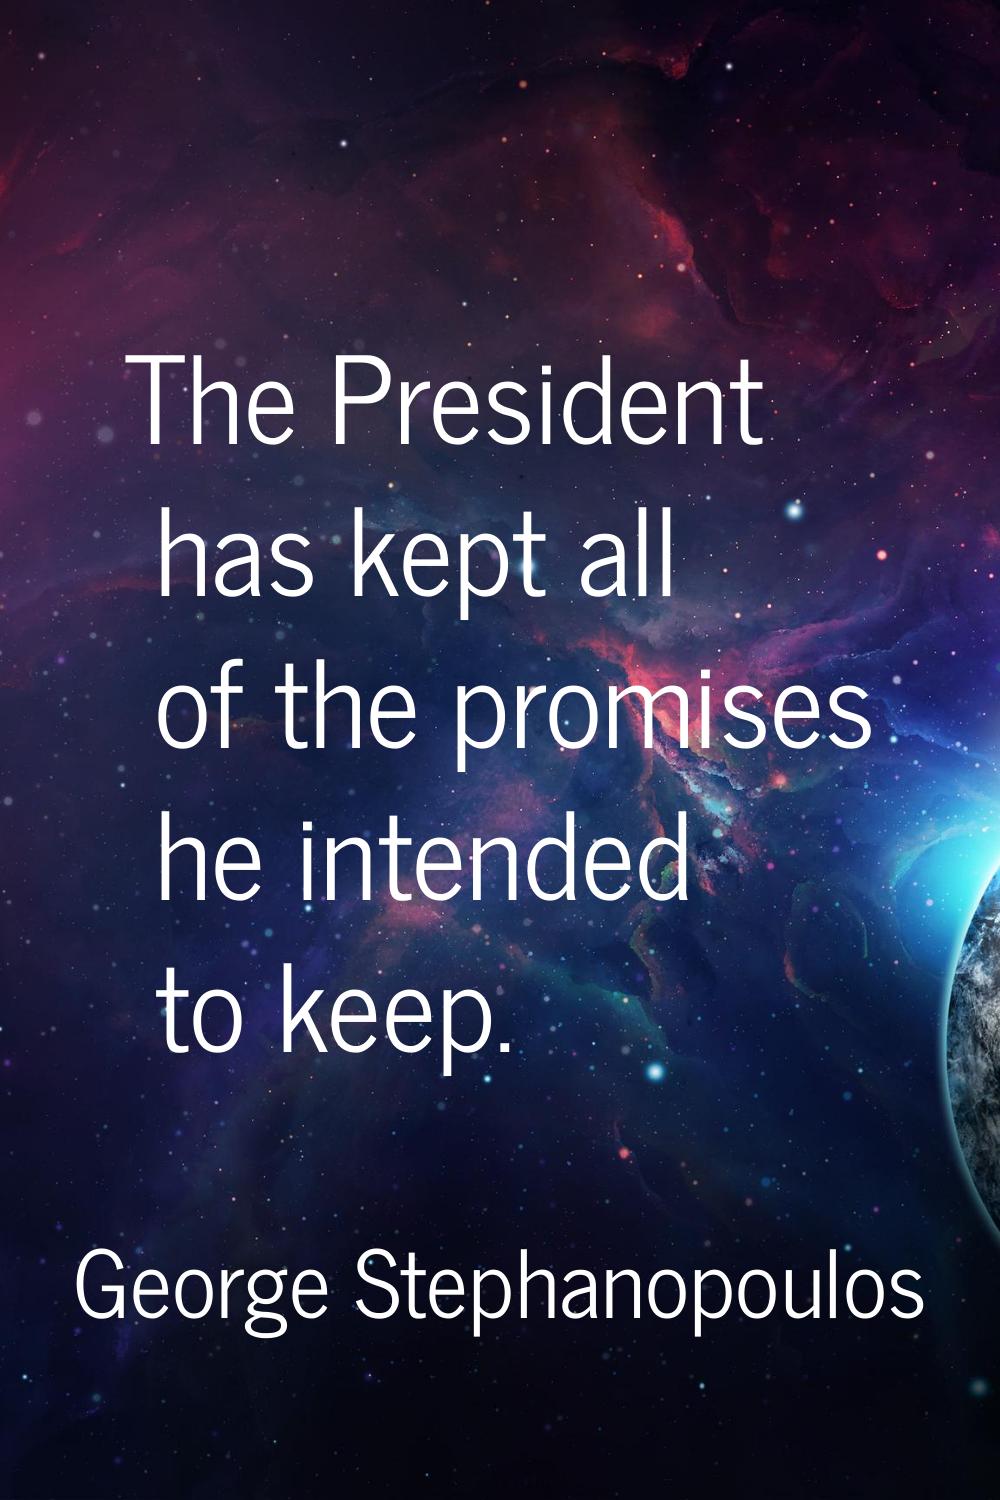 The President has kept all of the promises he intended to keep.